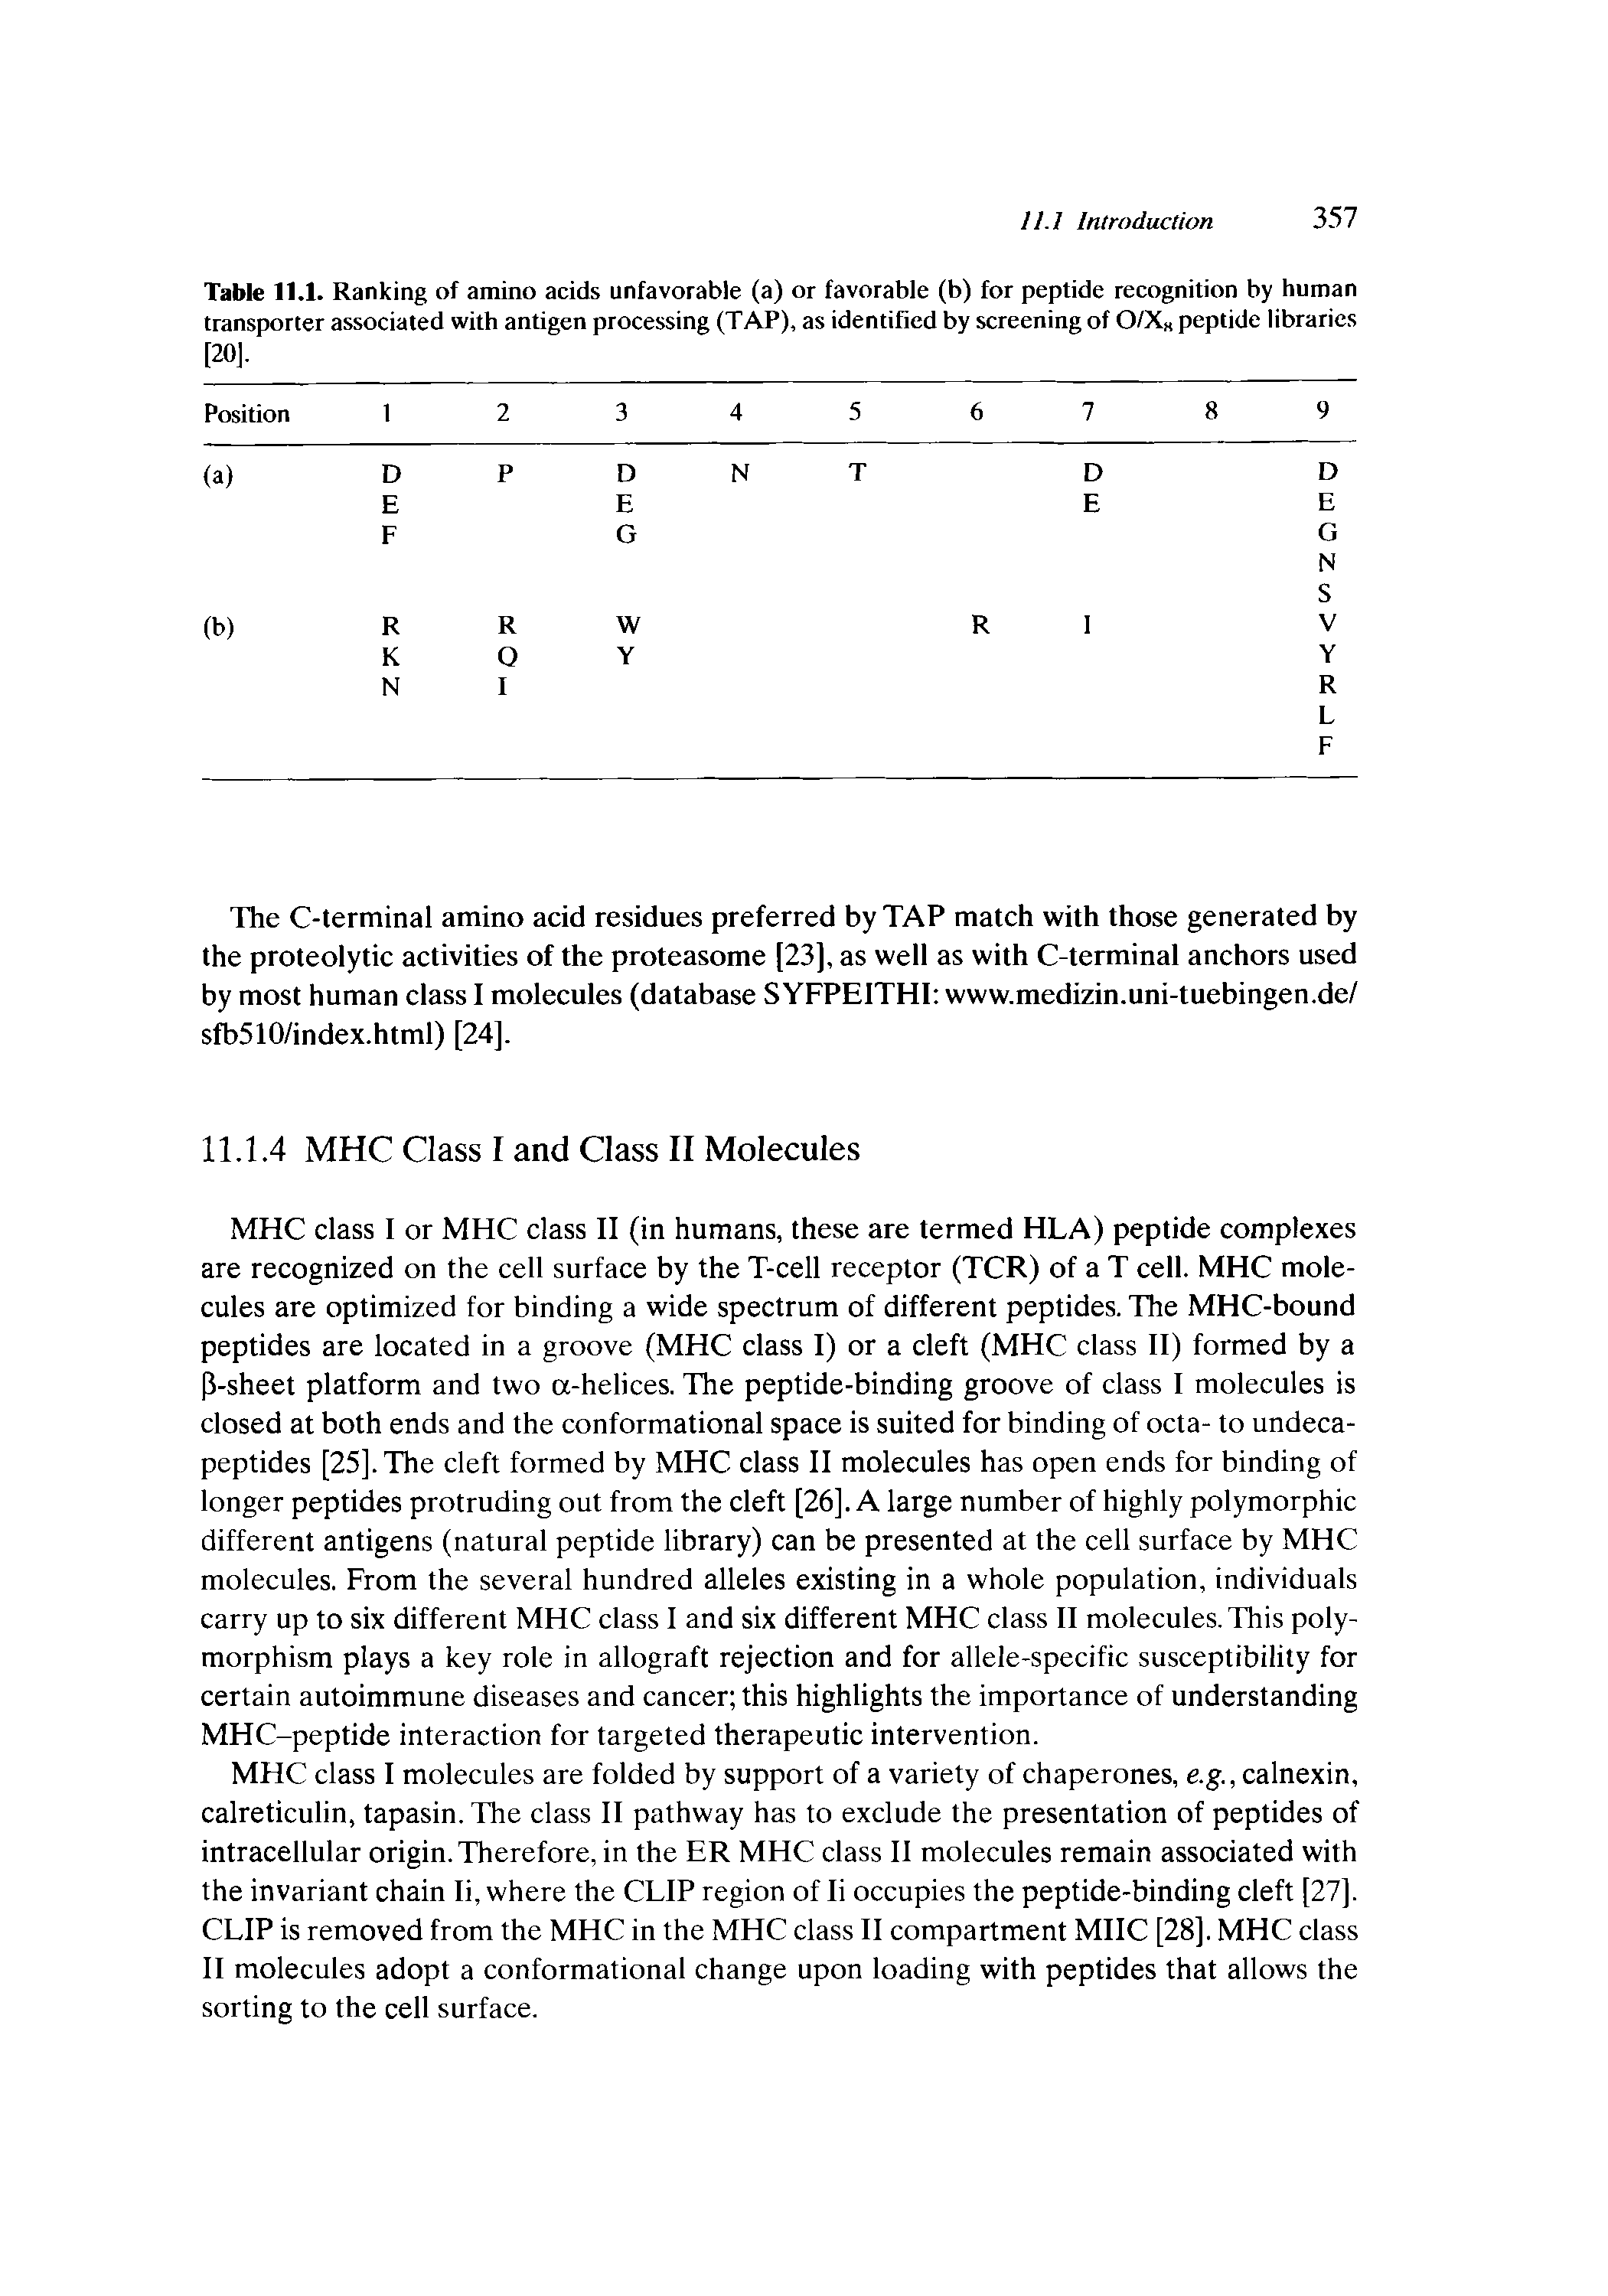 Table 11.1. Ranking of amino acids unfavorable (a) or favorable (b) for peptide recognition by human transporter associated with antigen processing (TAP), as identified by screening of 0/X peptide libraries [20].